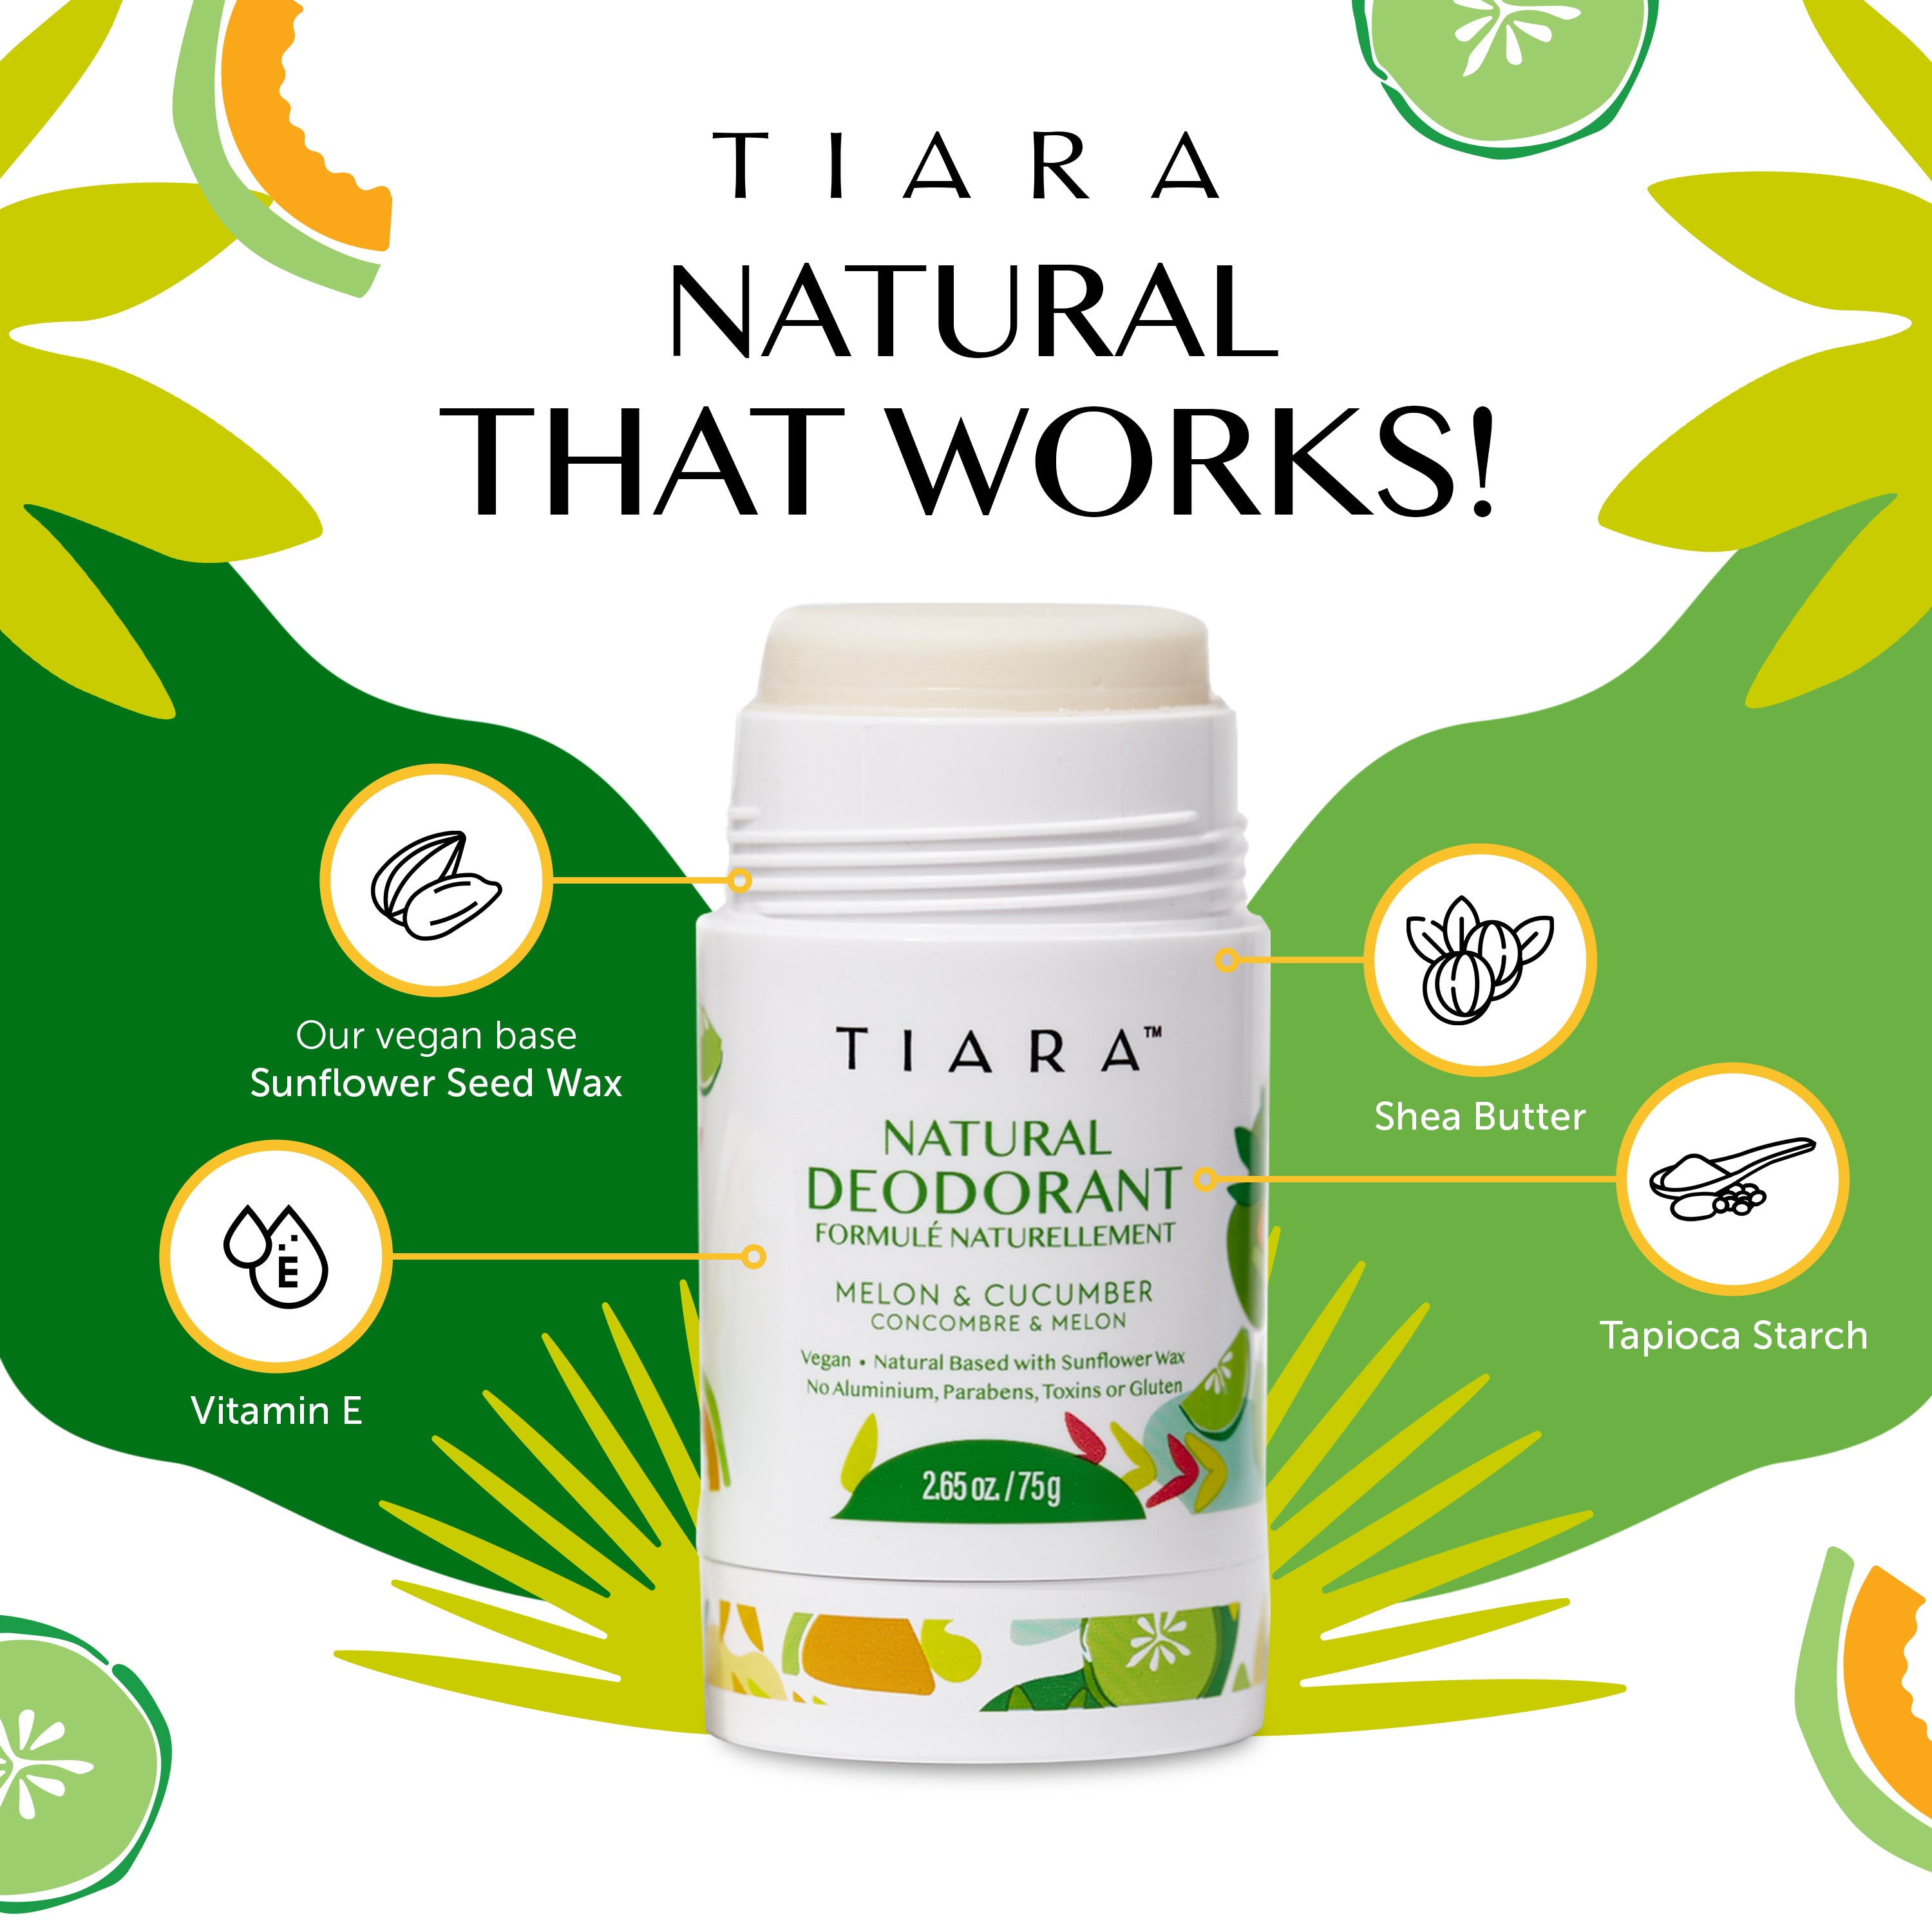 In the picture you can see the TIARA Natural Deodorant Melon and Cucumber version. Green, natural  design with cucumber slices and Melon pieces. 75 grams / 2.65 ounces Vegan, Natural Based with Sunflower Wax - No Aluminum, Parabens, Toxins or Gluten is the information on the packaging.  The deodorant is open and shows the stick. There is an explanatory information about the ingredients : Our vegan base - Sunflower Seed Wax, Shea Butter, Tapioca Starch, Vitamin E. 